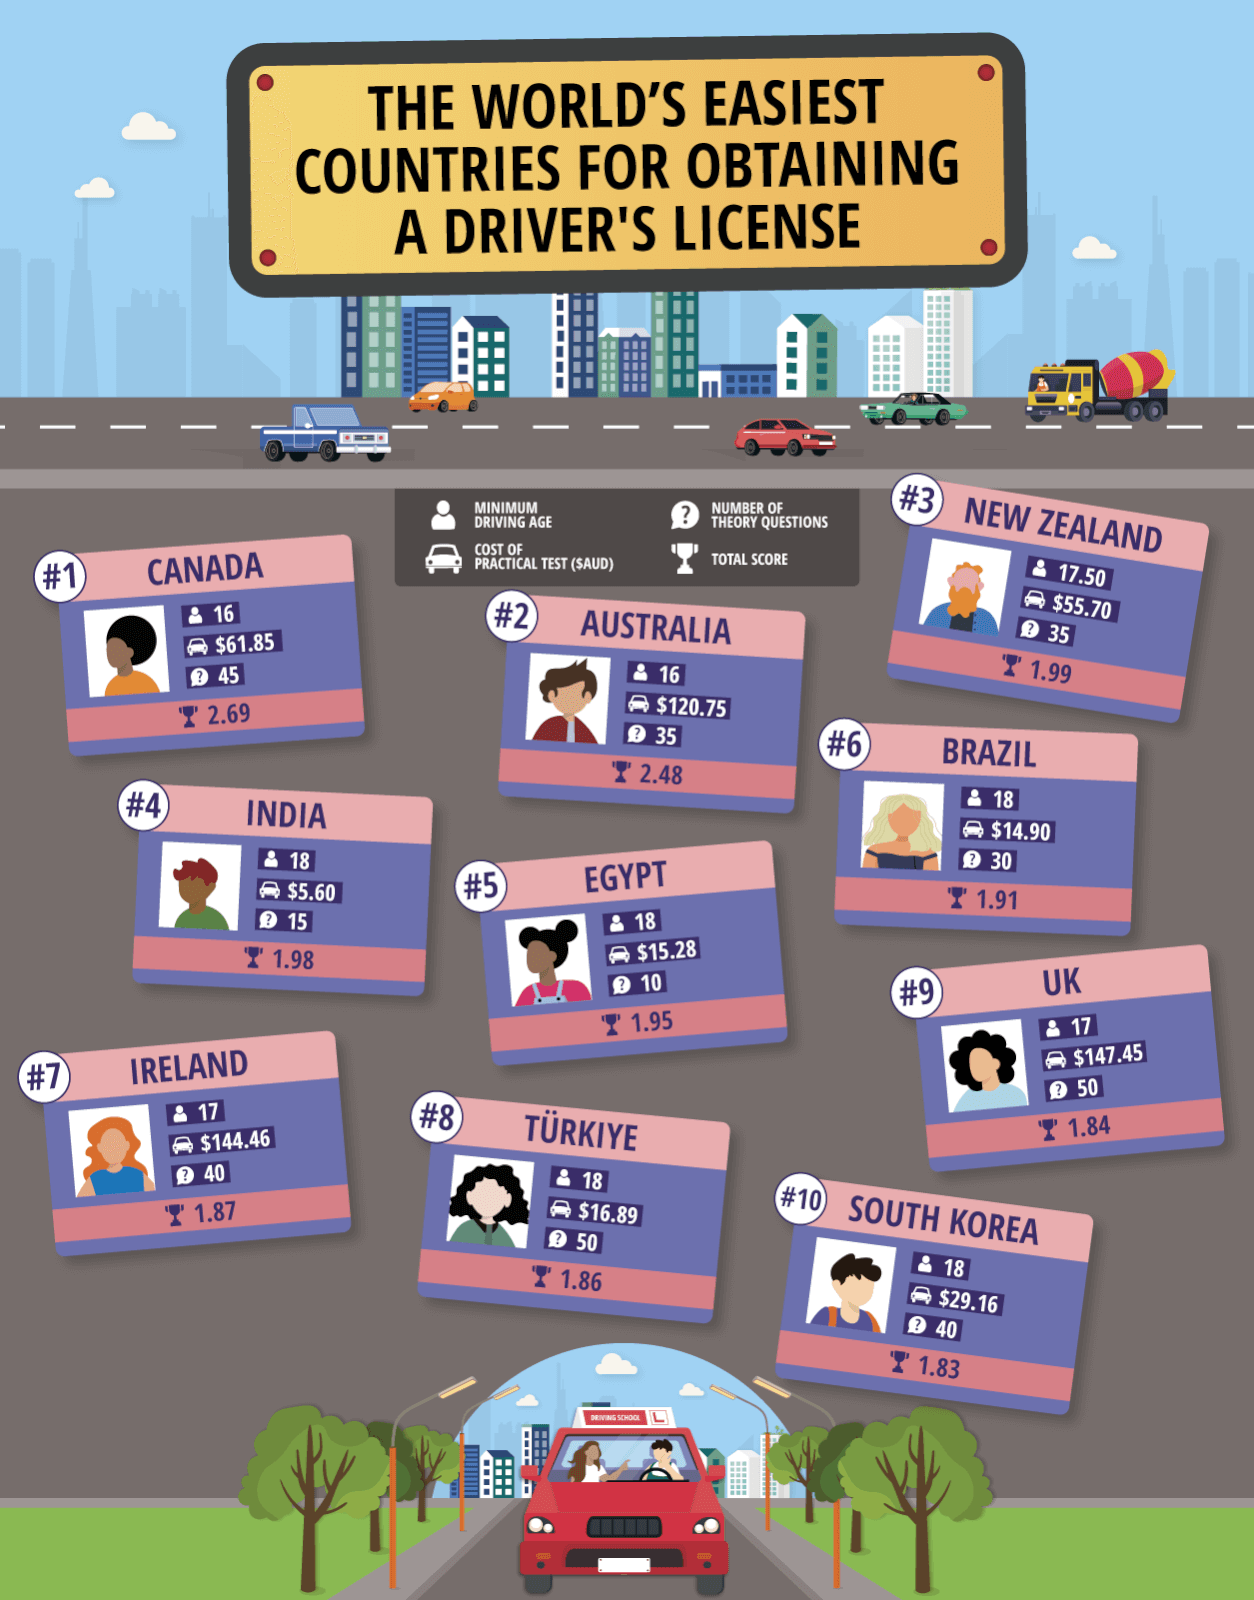 Image showing the ten easiest countries for obtaining a driver's license.